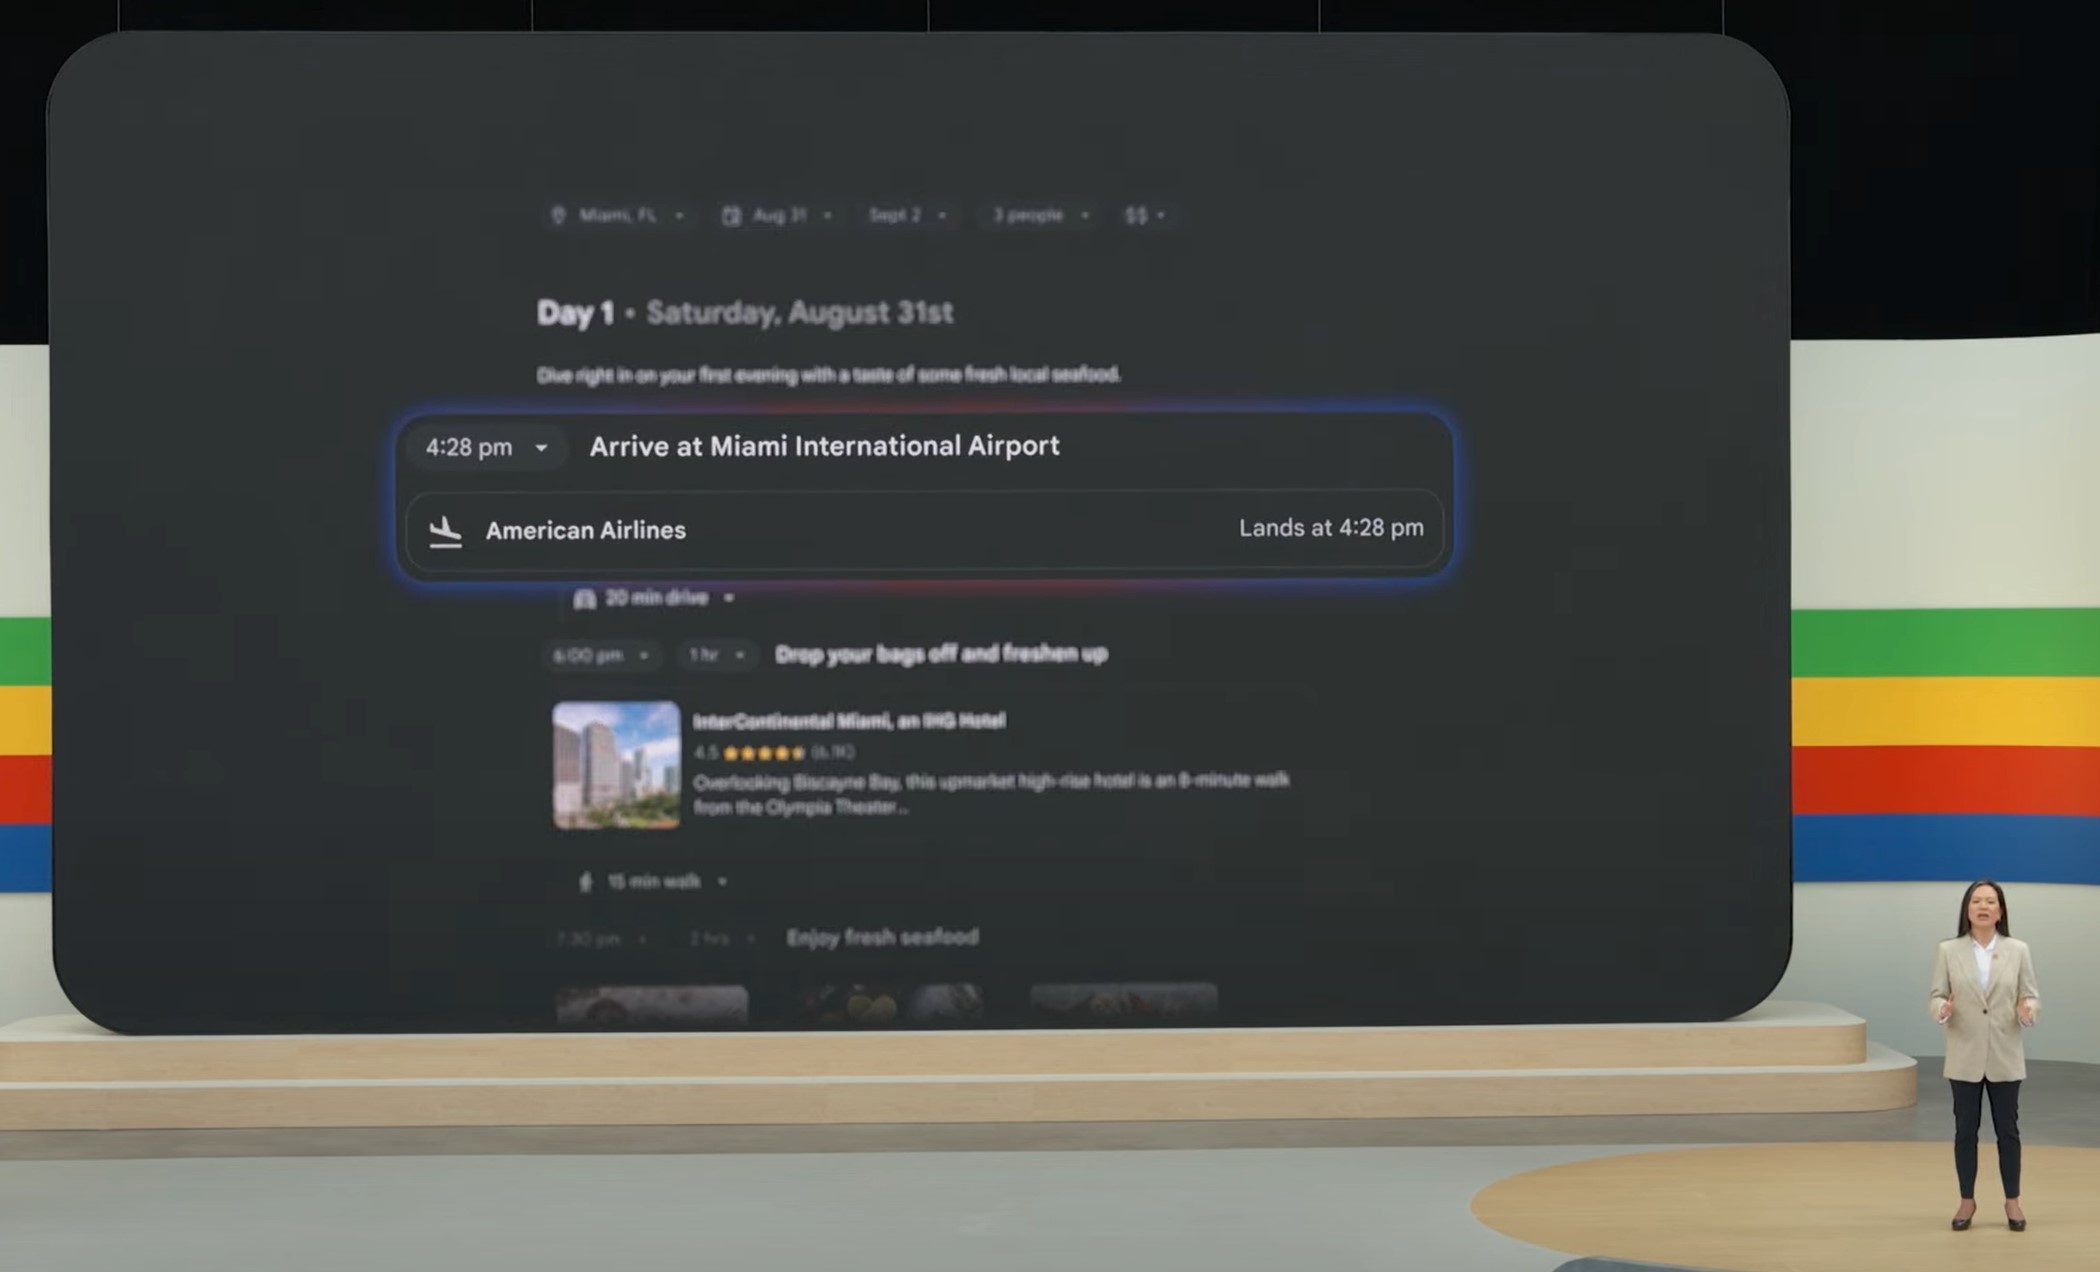 google i/o trip planning feature example itinerary